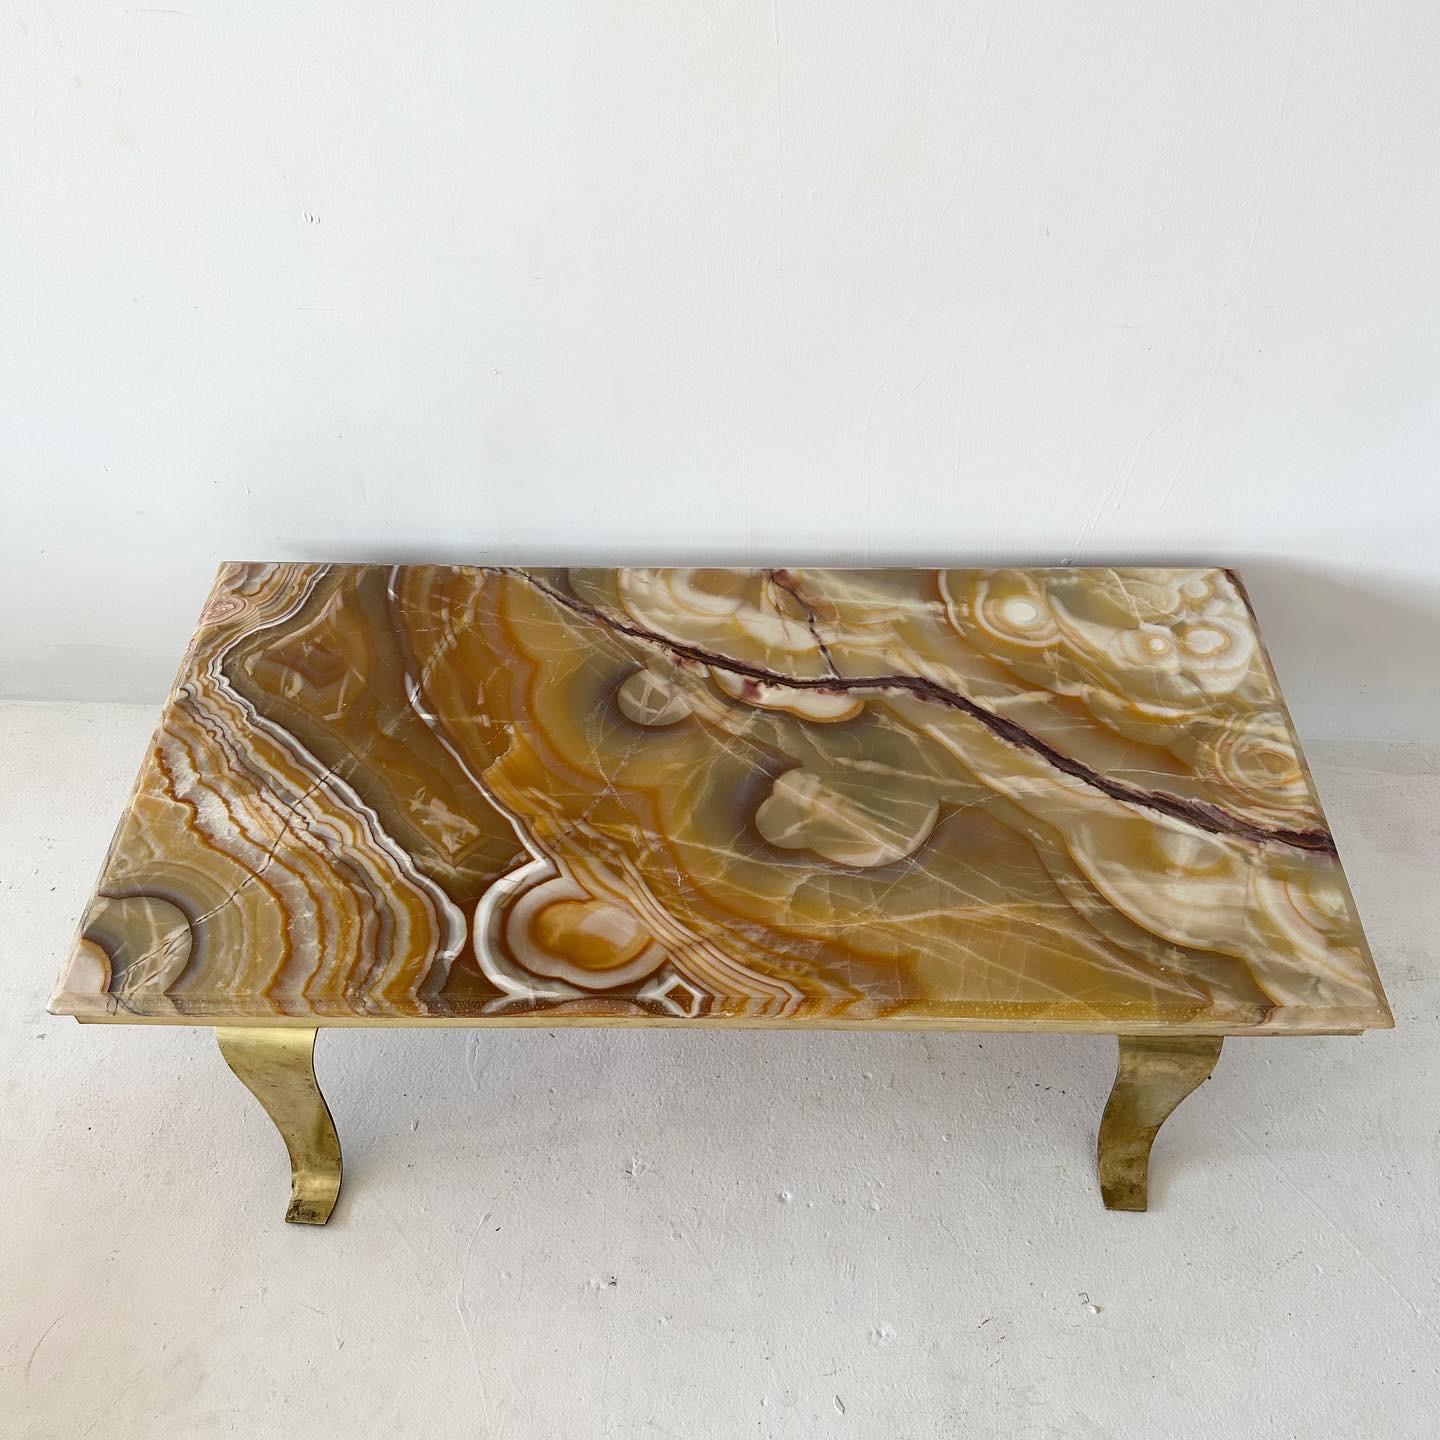 1960s Arturo Pani for Muller of Mexico alabaster coffee table with brass trim and winged legs. Often described as onyx, the surface has just been given a matte refinish. Made in Acapulco. Wear consistent with age.